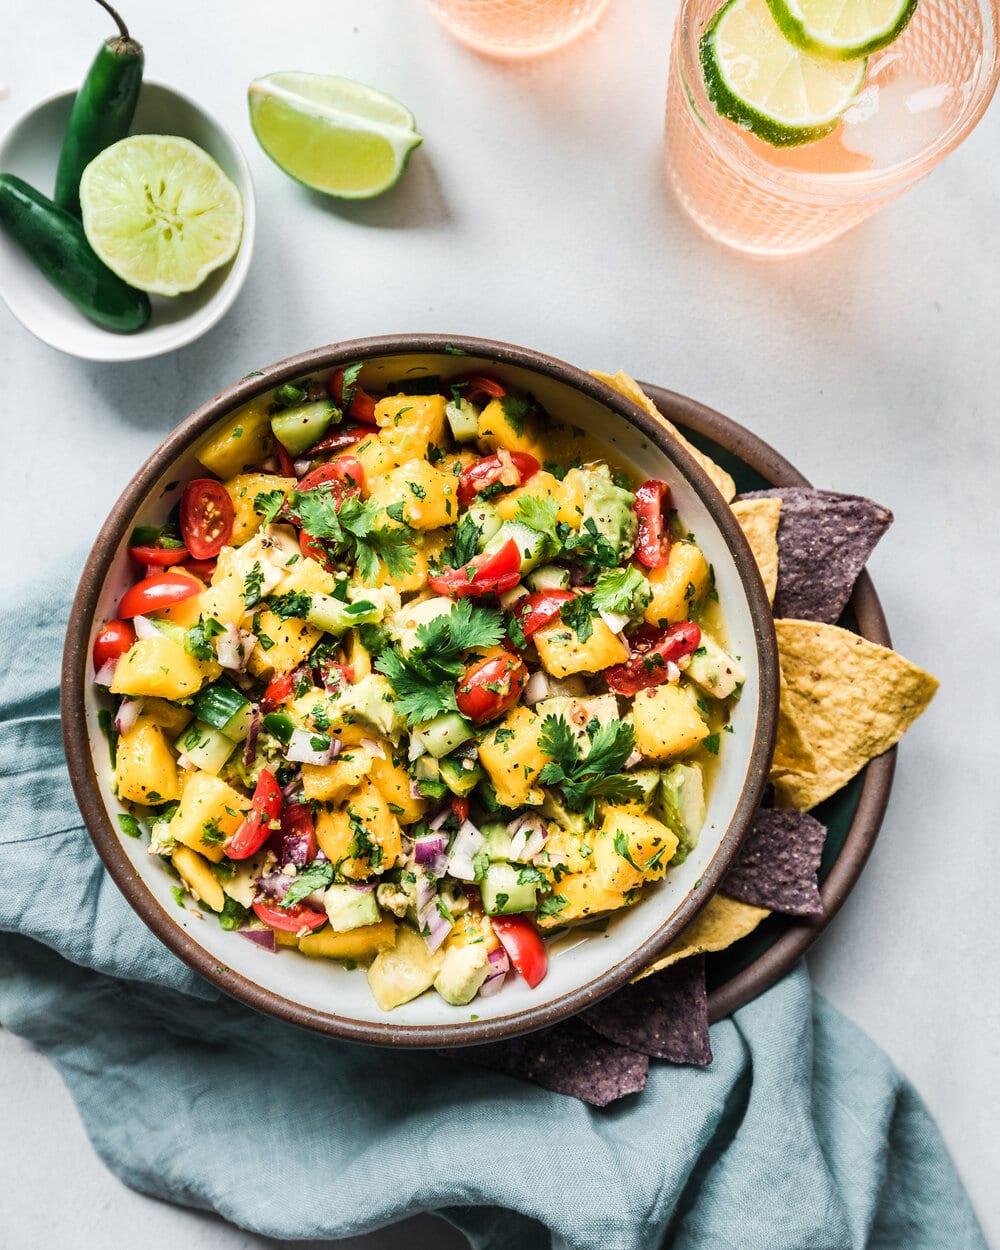 Mango and avocado salsa in a bowl with tortilla chips and limes.